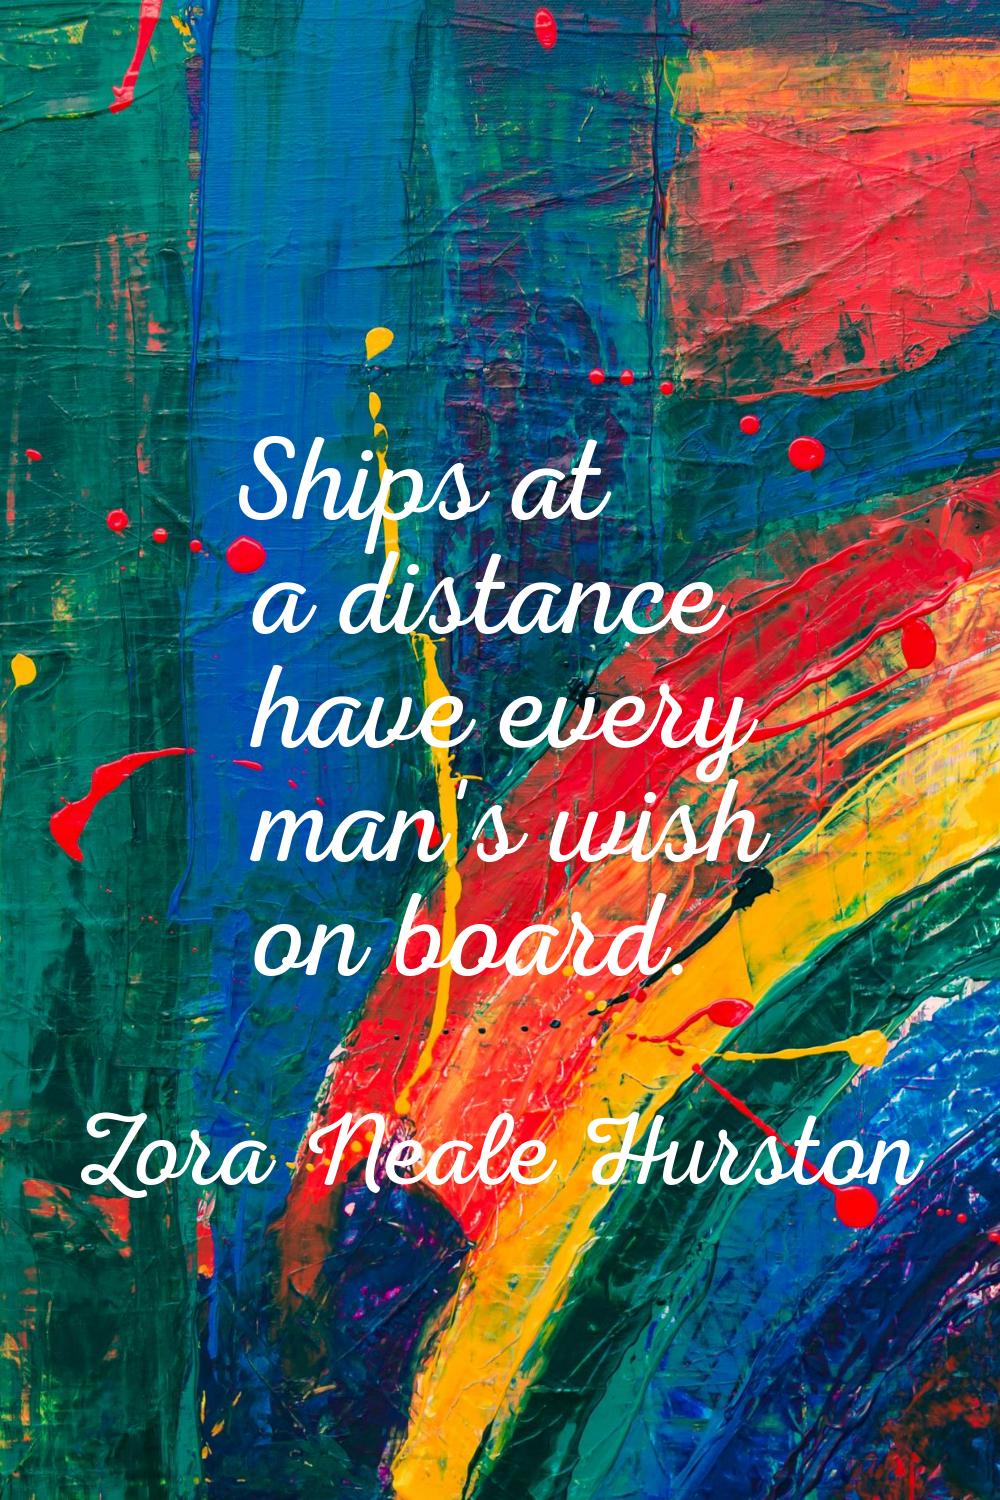 Ships at a distance have every man's wish on board.